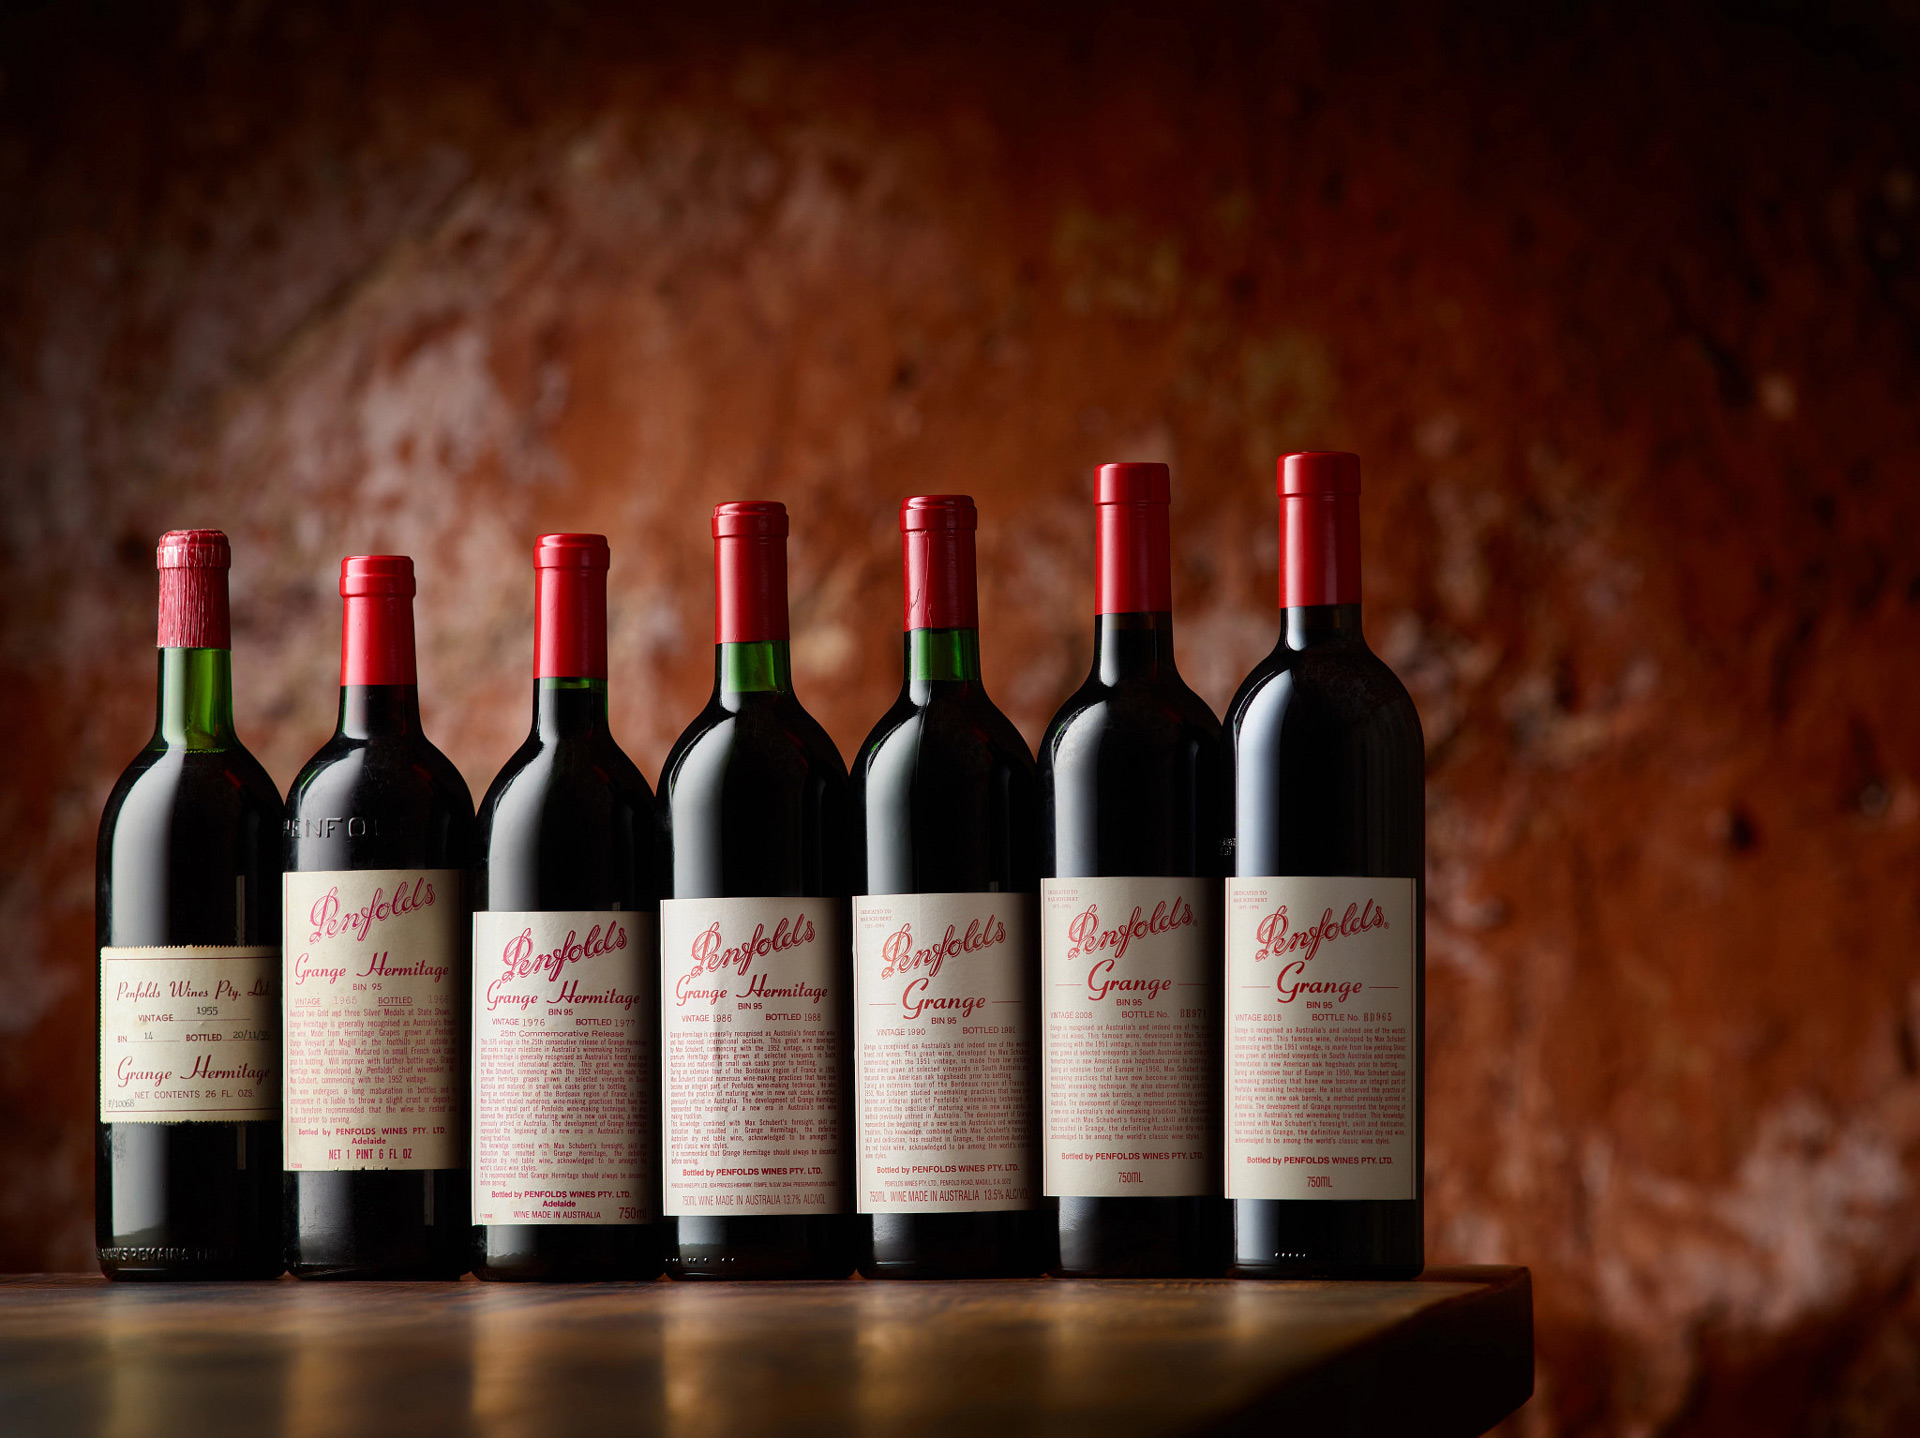 Penfolds Grange evolution of the wine labels across 7 decades | 2022